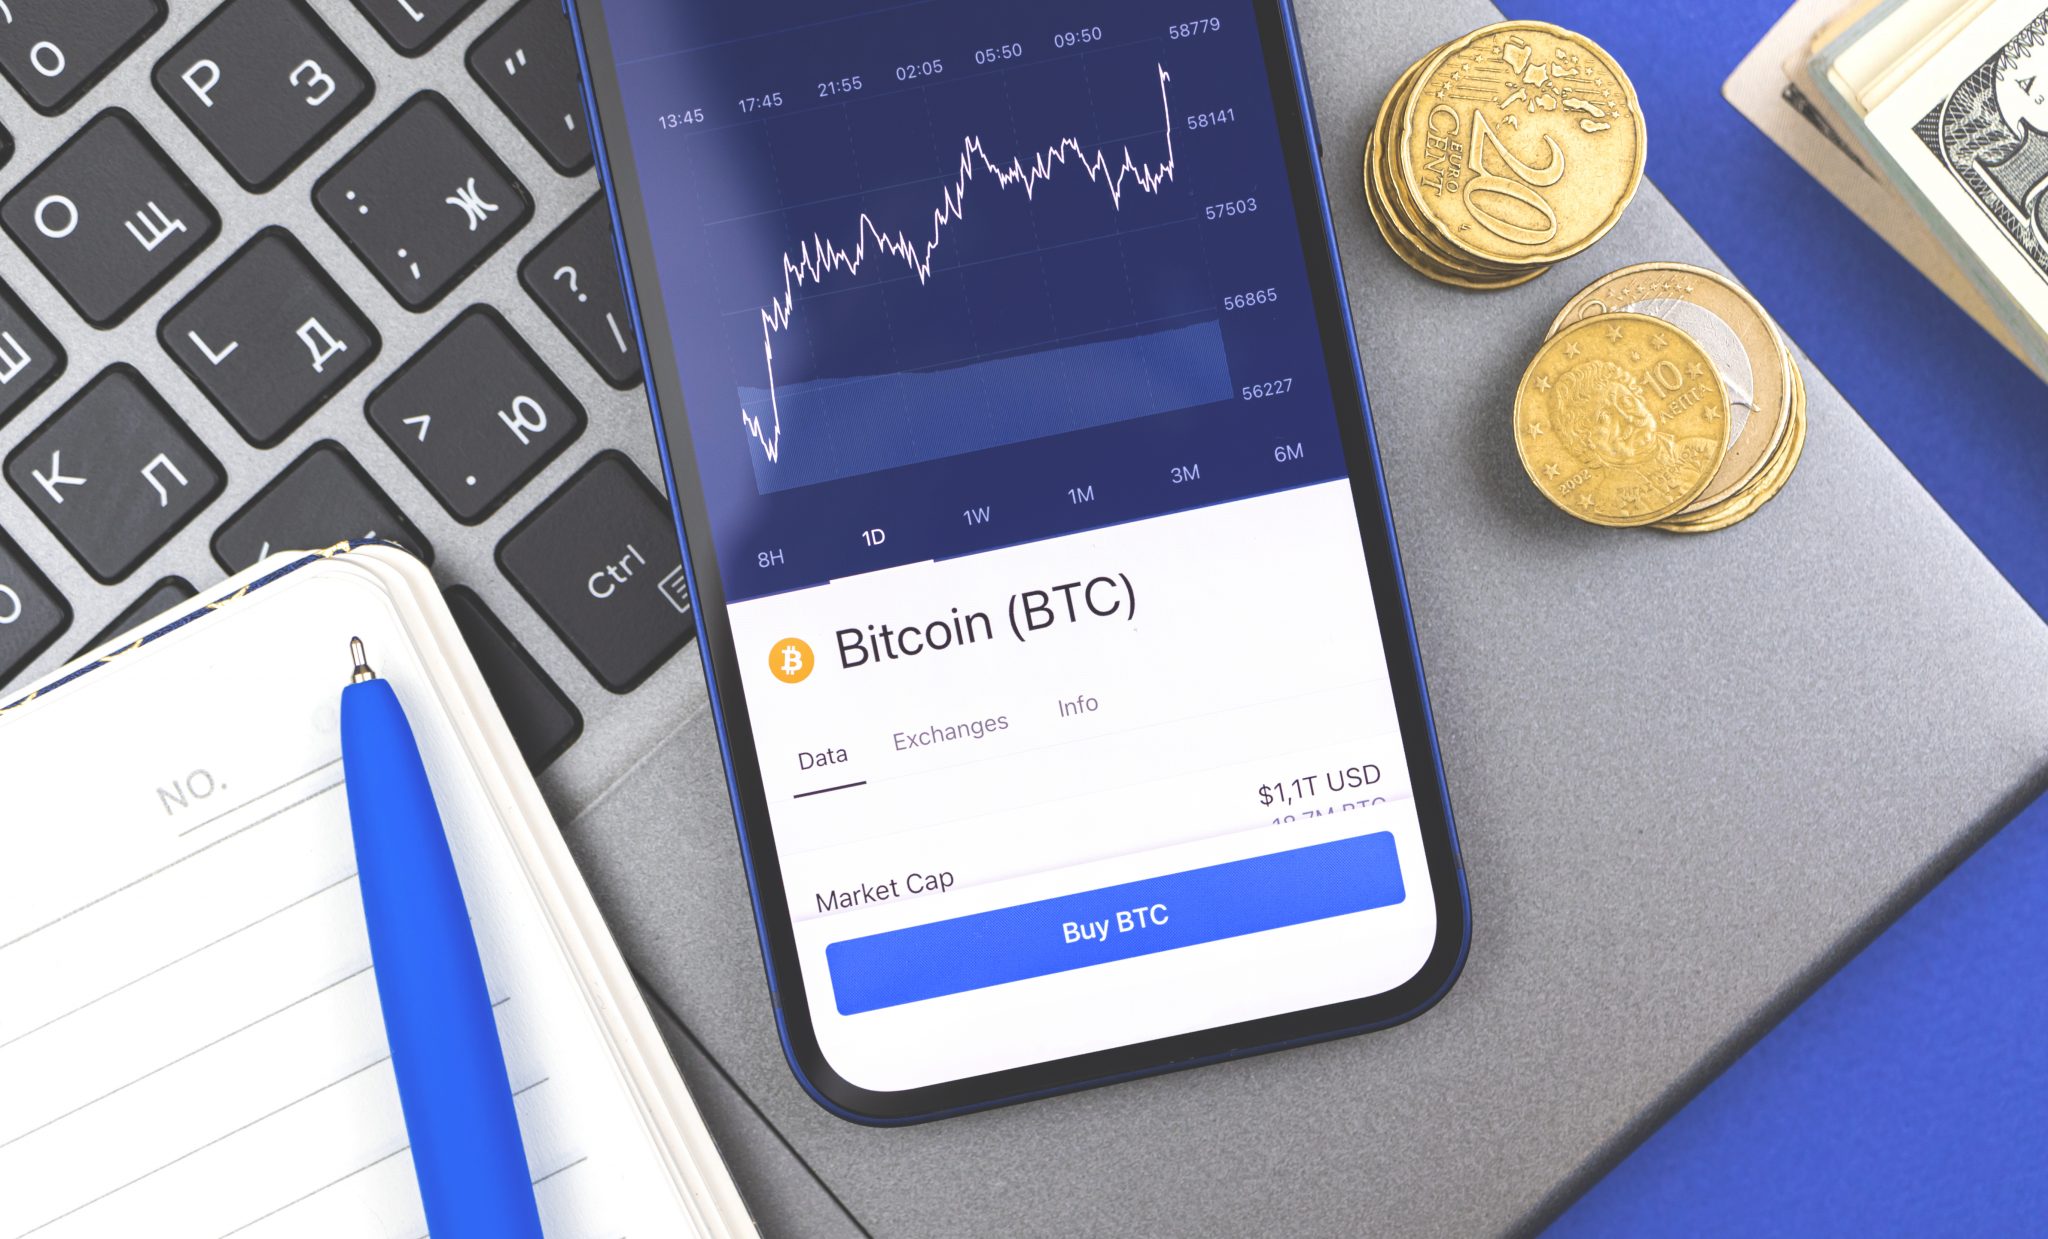 Cryptocurrency trade and buy bitcoin on the stock exchanges background, mobile technology concept photo